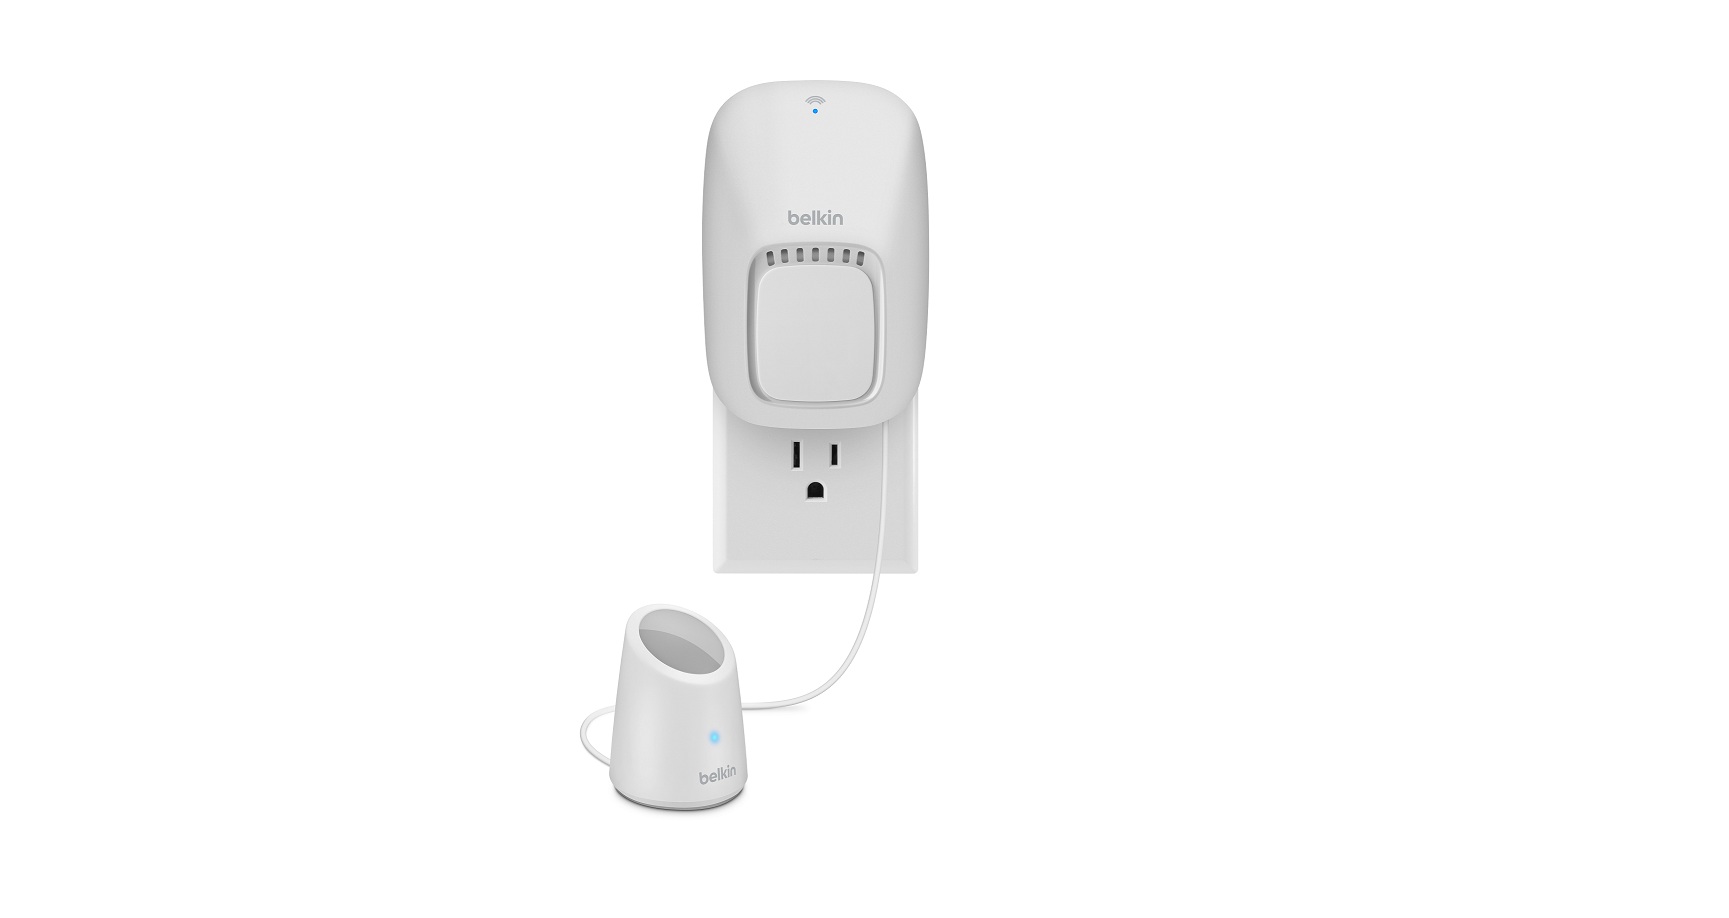 Belkin Announces Availability of WeMo Switch and WeMo Switch + Motion